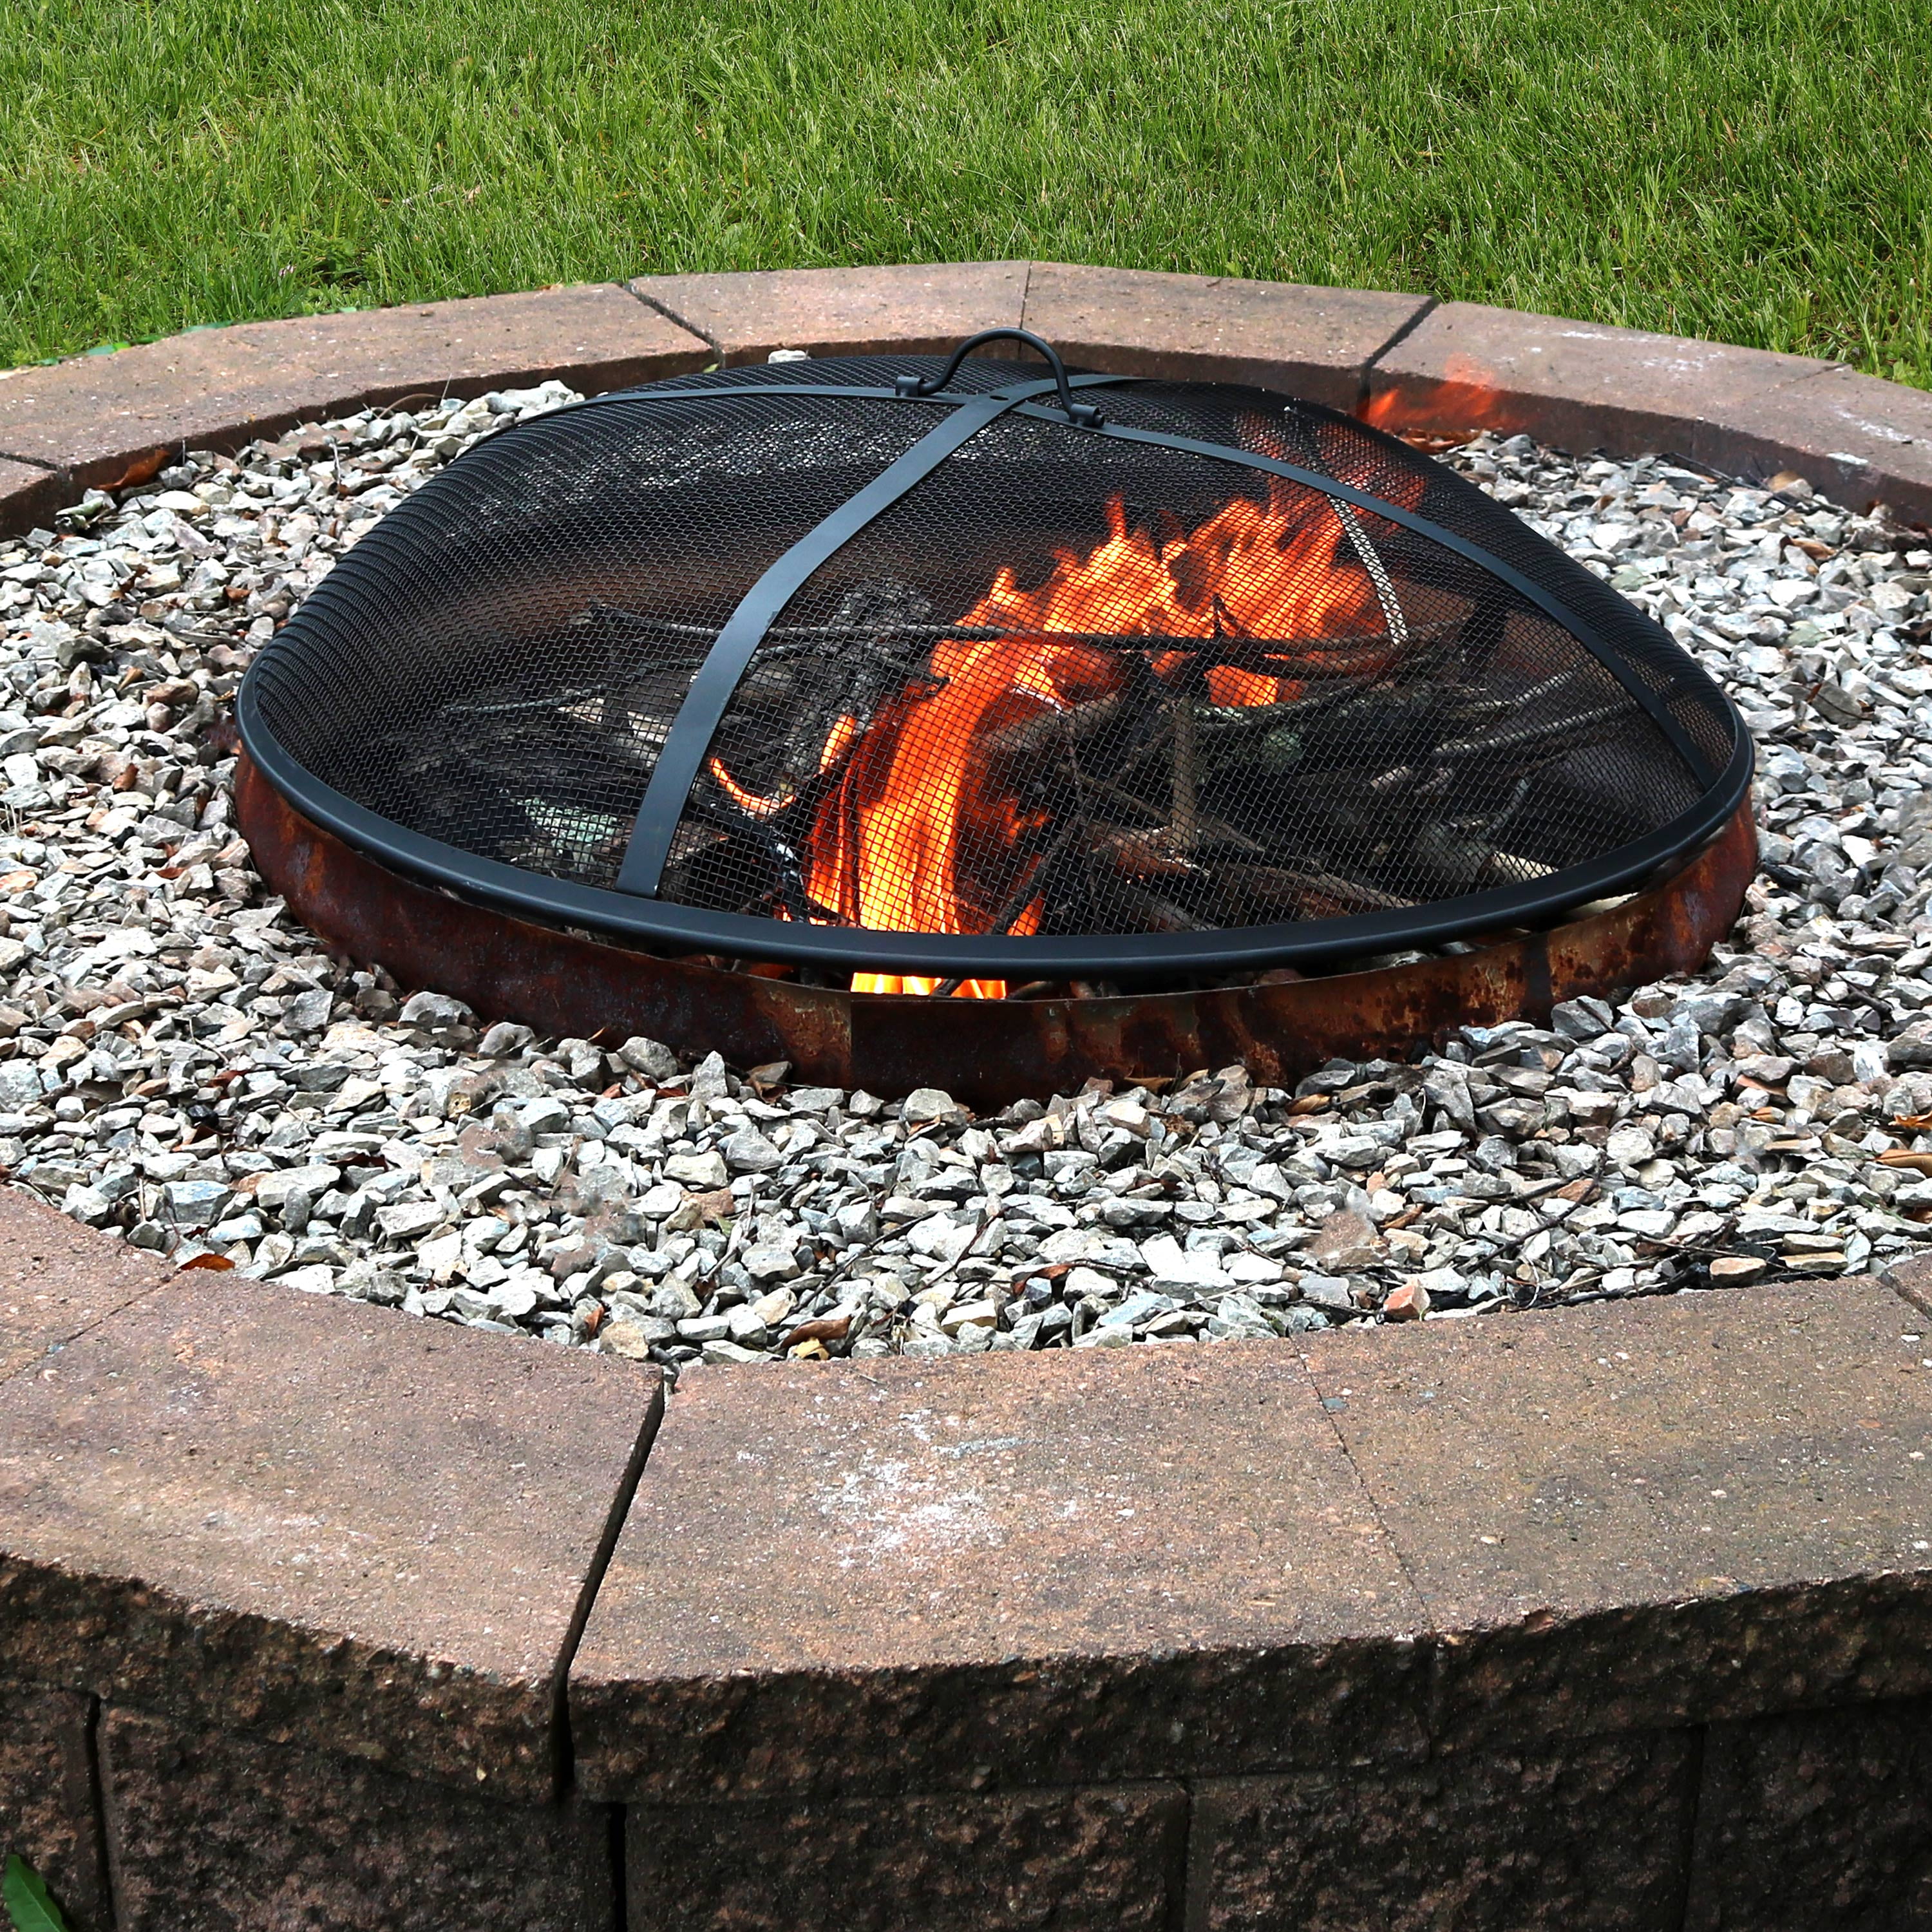 Replacement Bowl For Fire Pit, Wood Burning Fire Pit Bowl Replacement